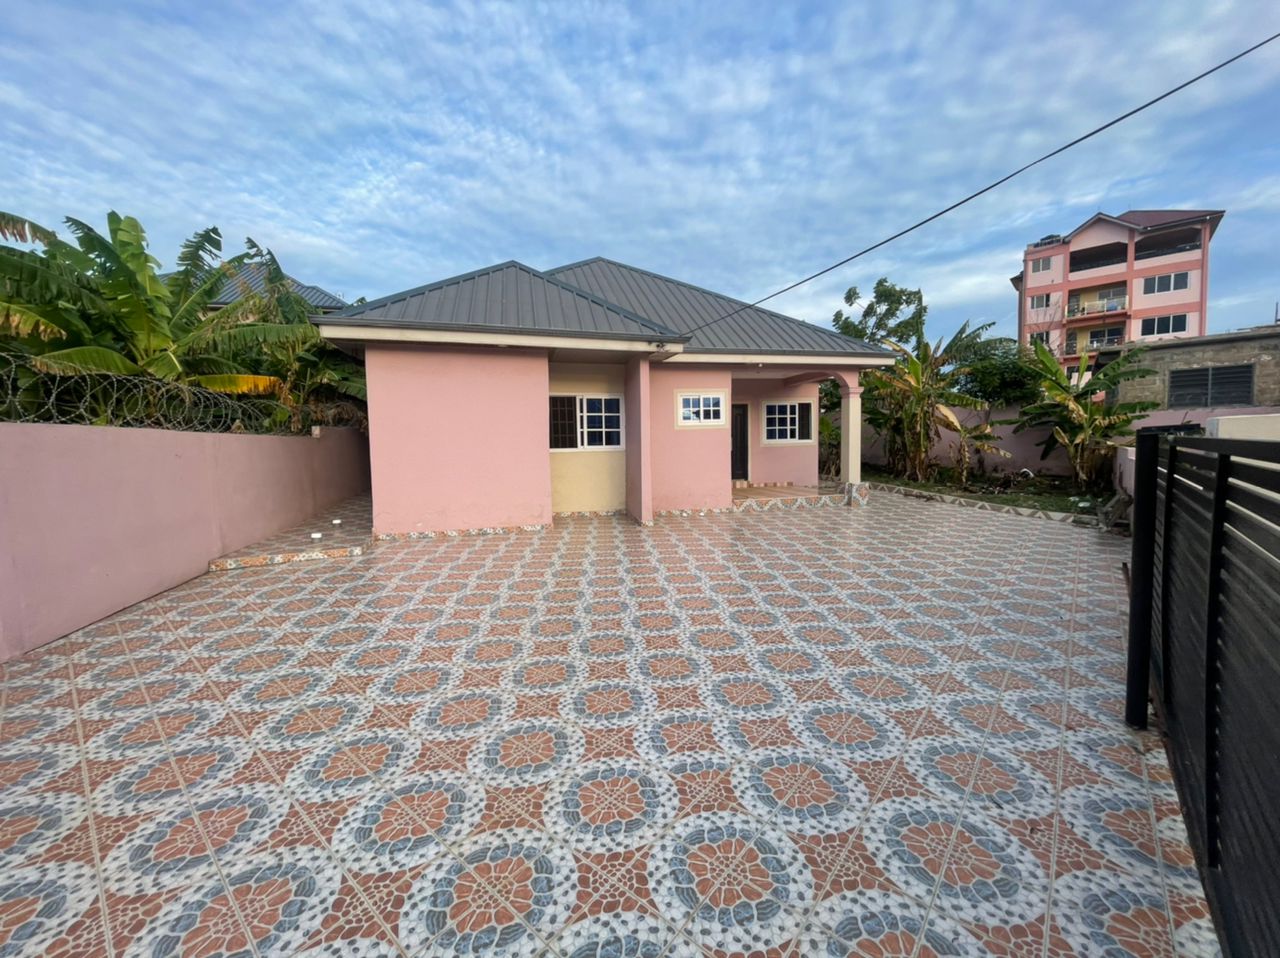 3 BEDROOM HOUSE FOR SALE AT MADINA ESTATE